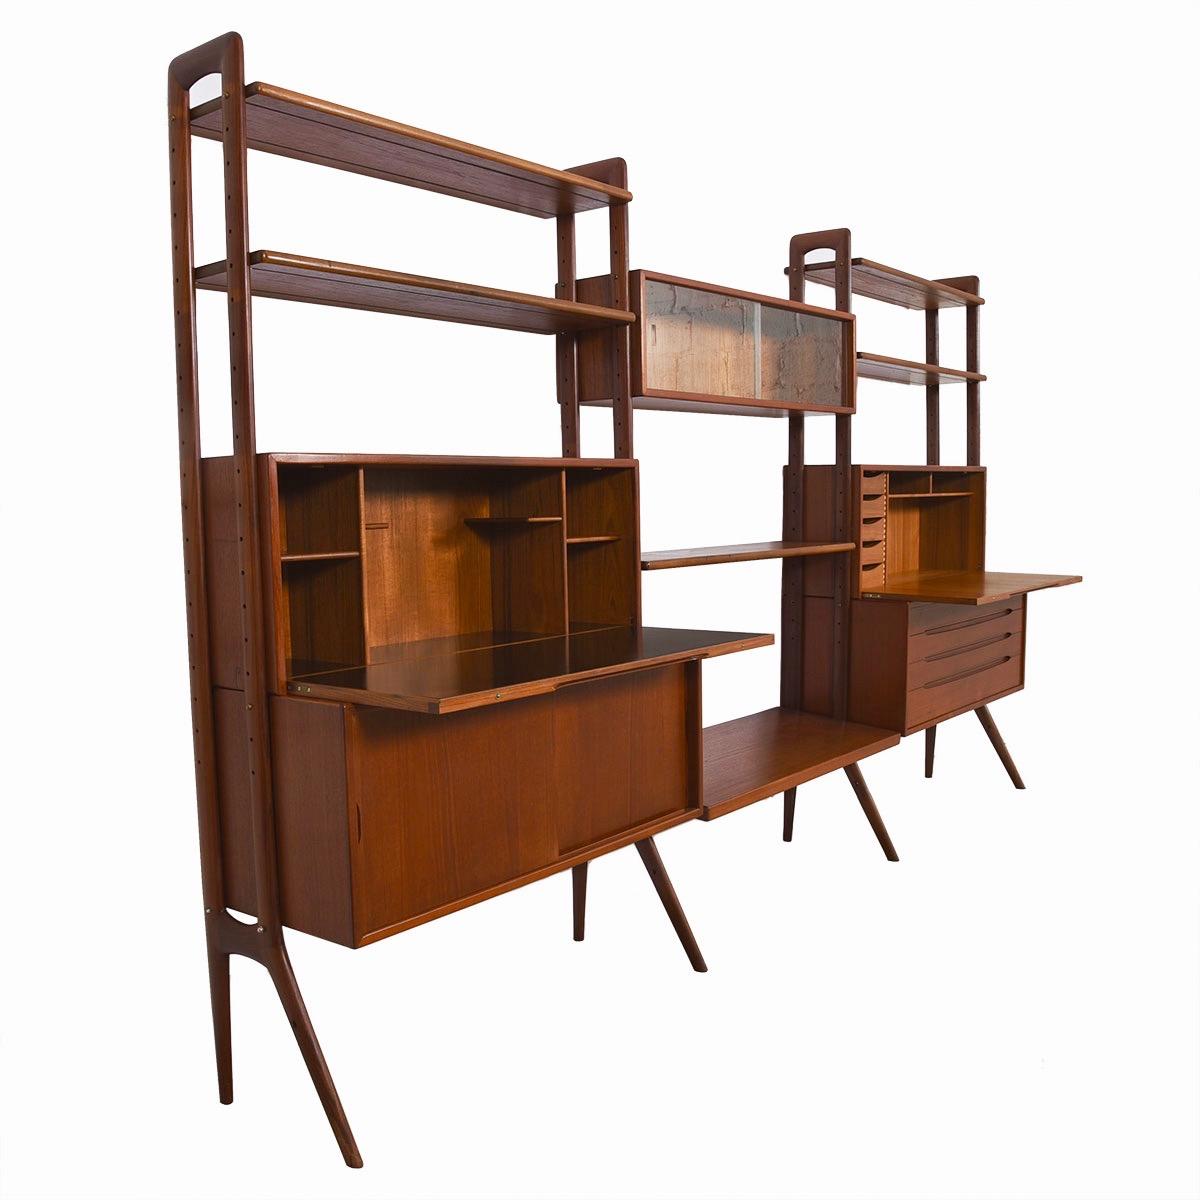 - The statement piece that will define your space yet also help to contain, organize and curate your stuff.
- Finished on the back for placement in the middle of a room.
- Use the drop-down surface on either side as a workstation or a bar.
-